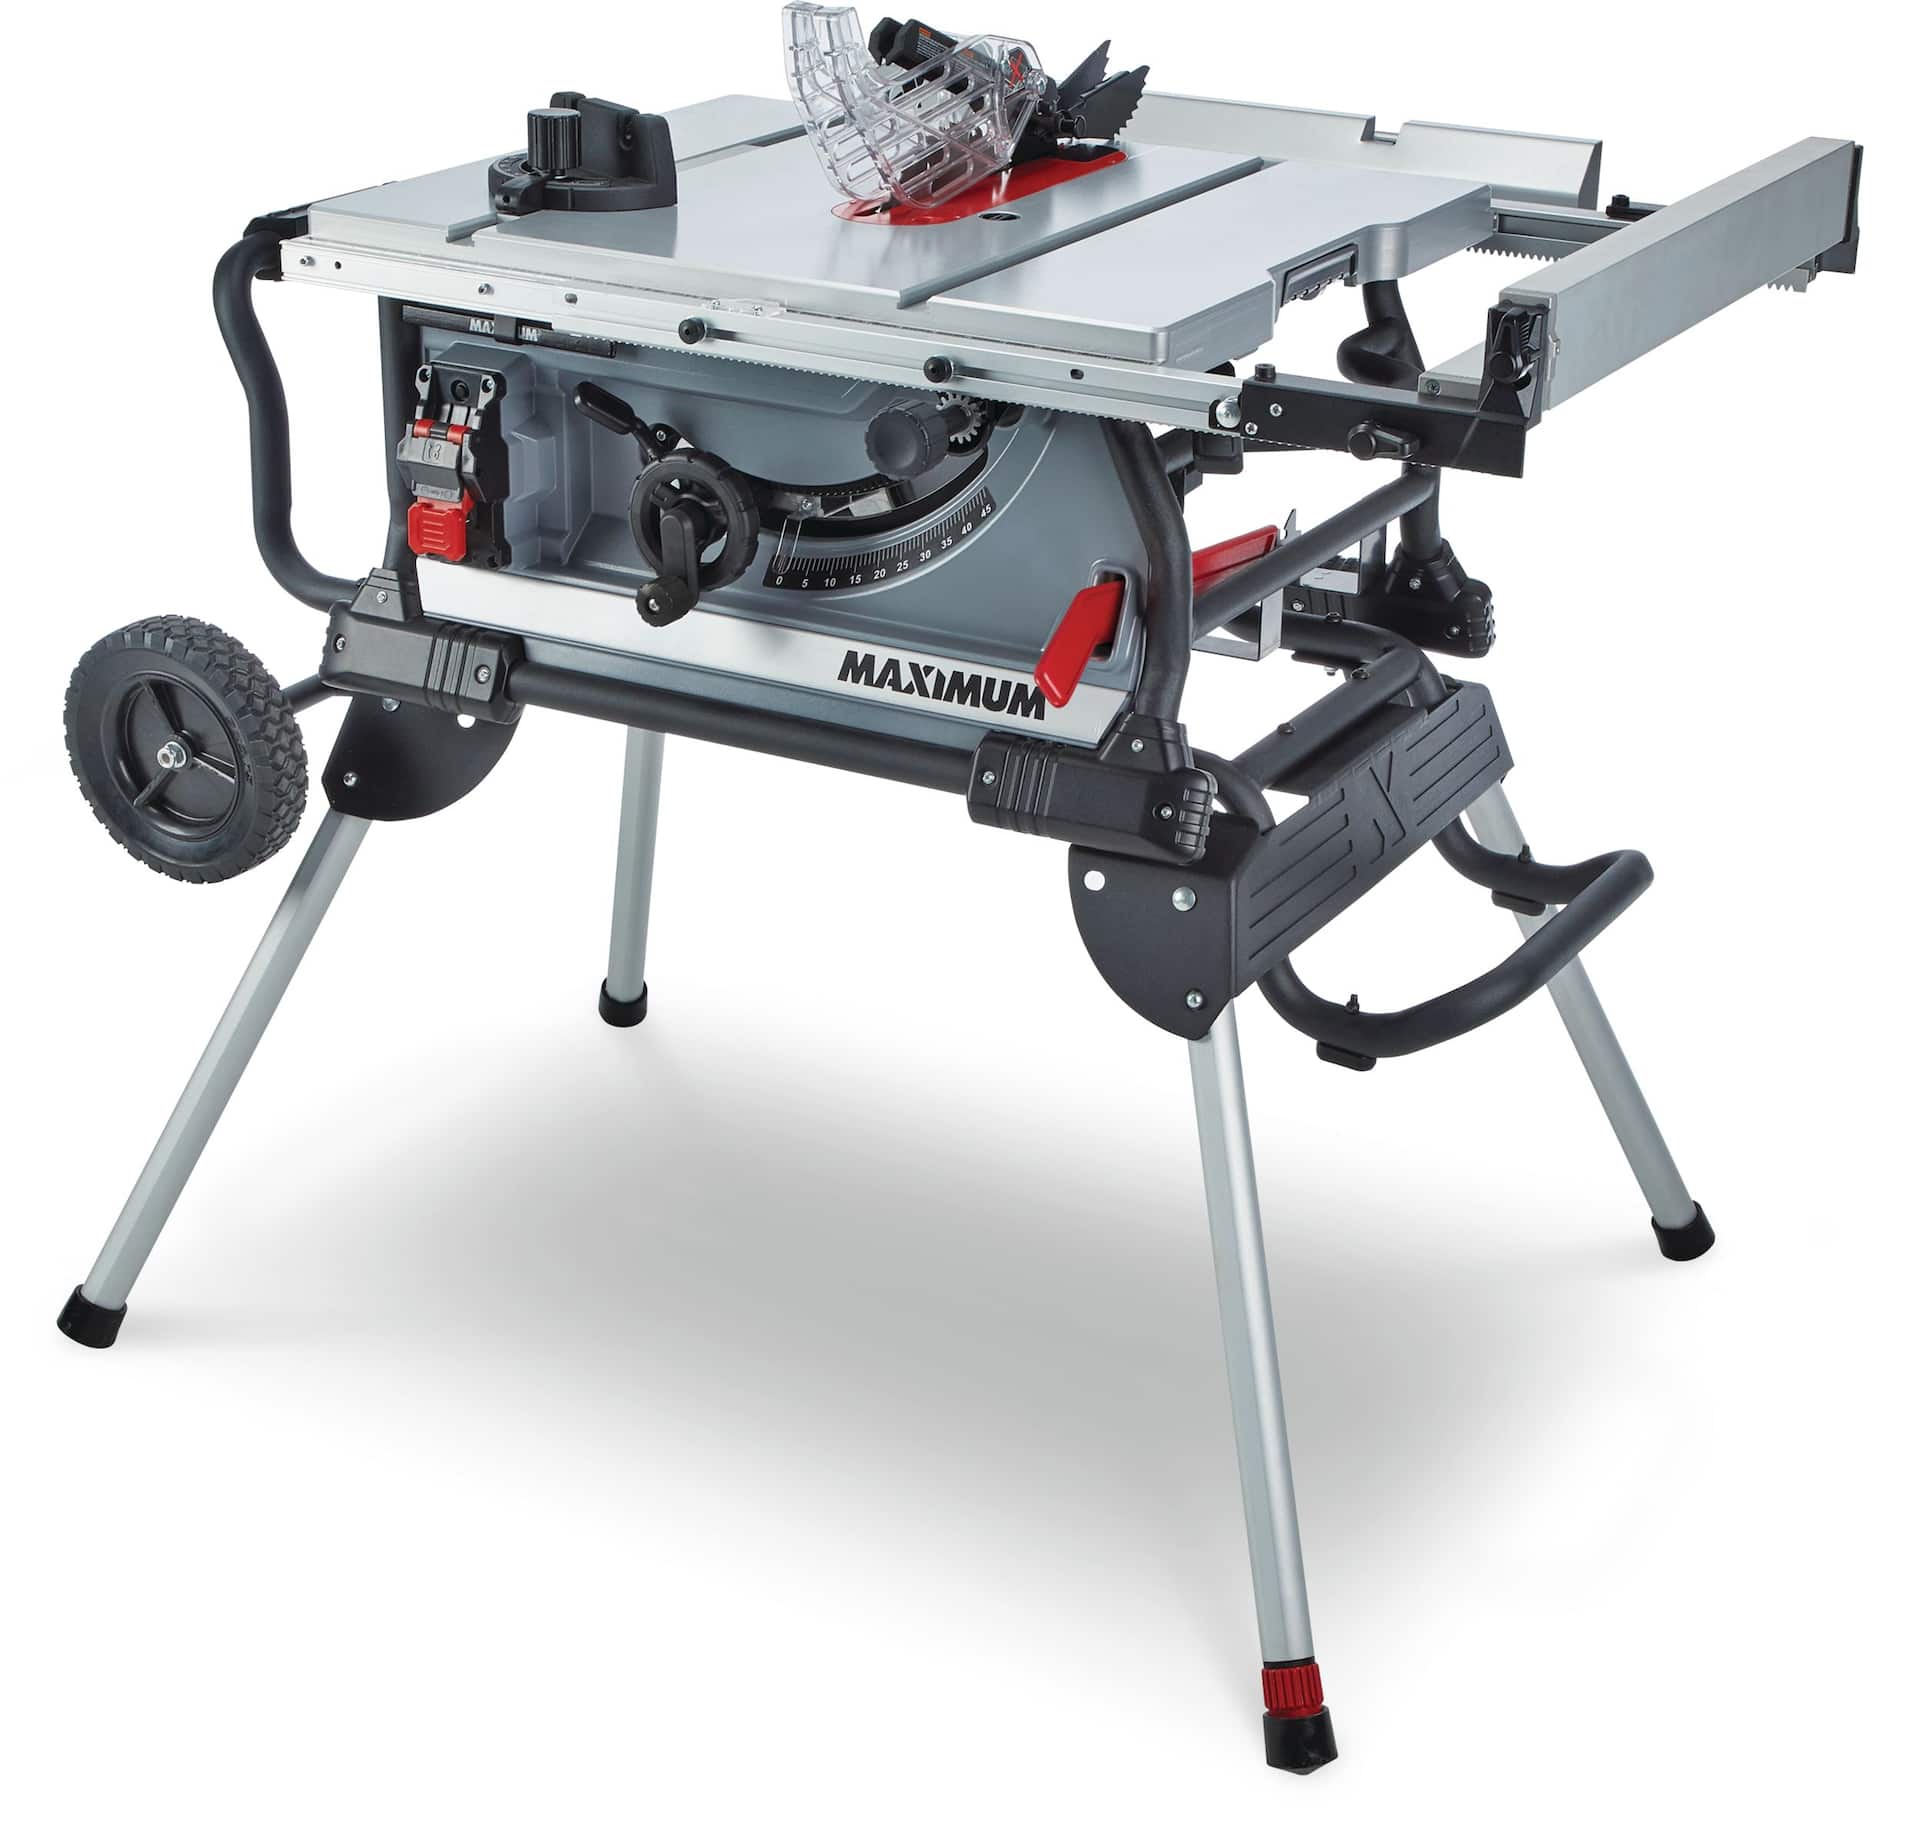 MAXIMUM 15 Amp Jobsite Table Saw with Rolling Stand, 10-in